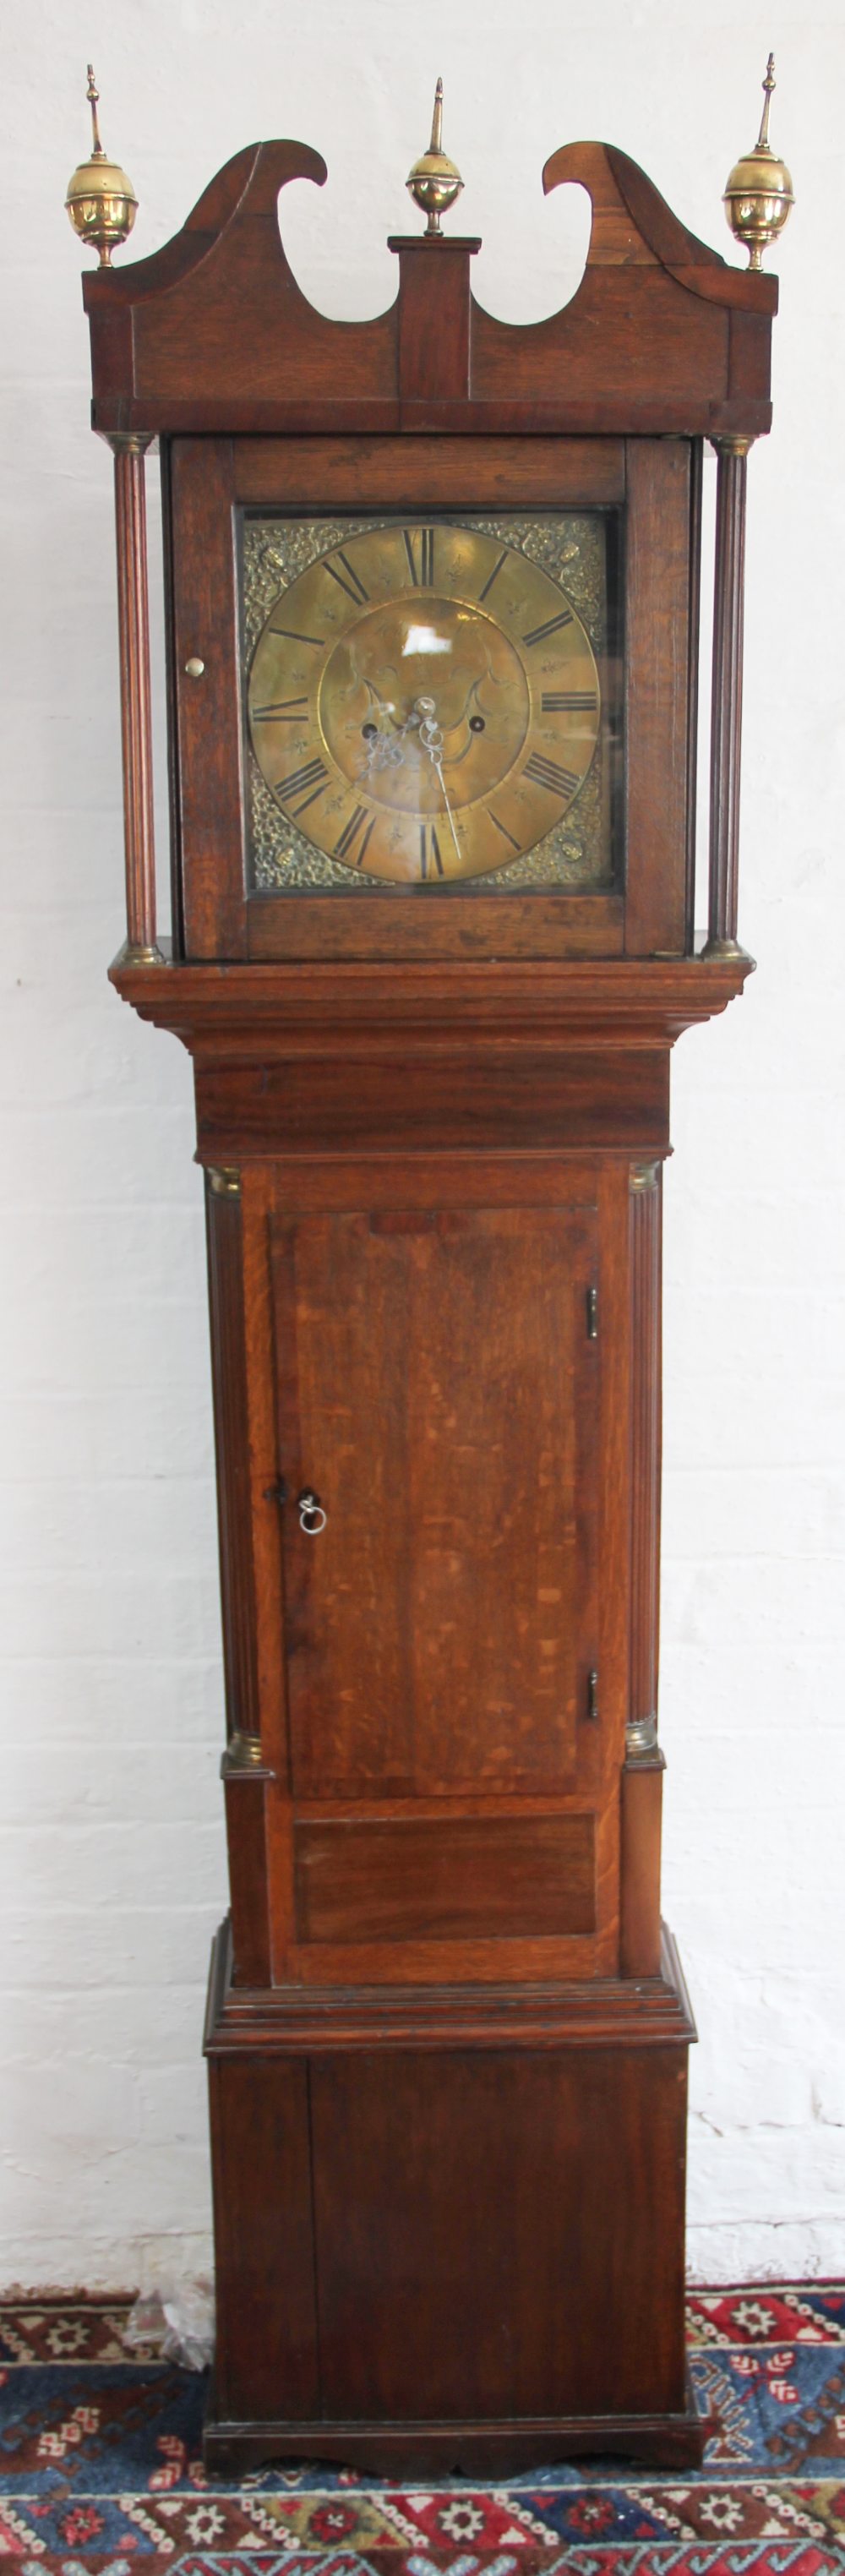 A George III oak and mahogany eight day longcase clock by Harper and Son of Shrewsbury, brass